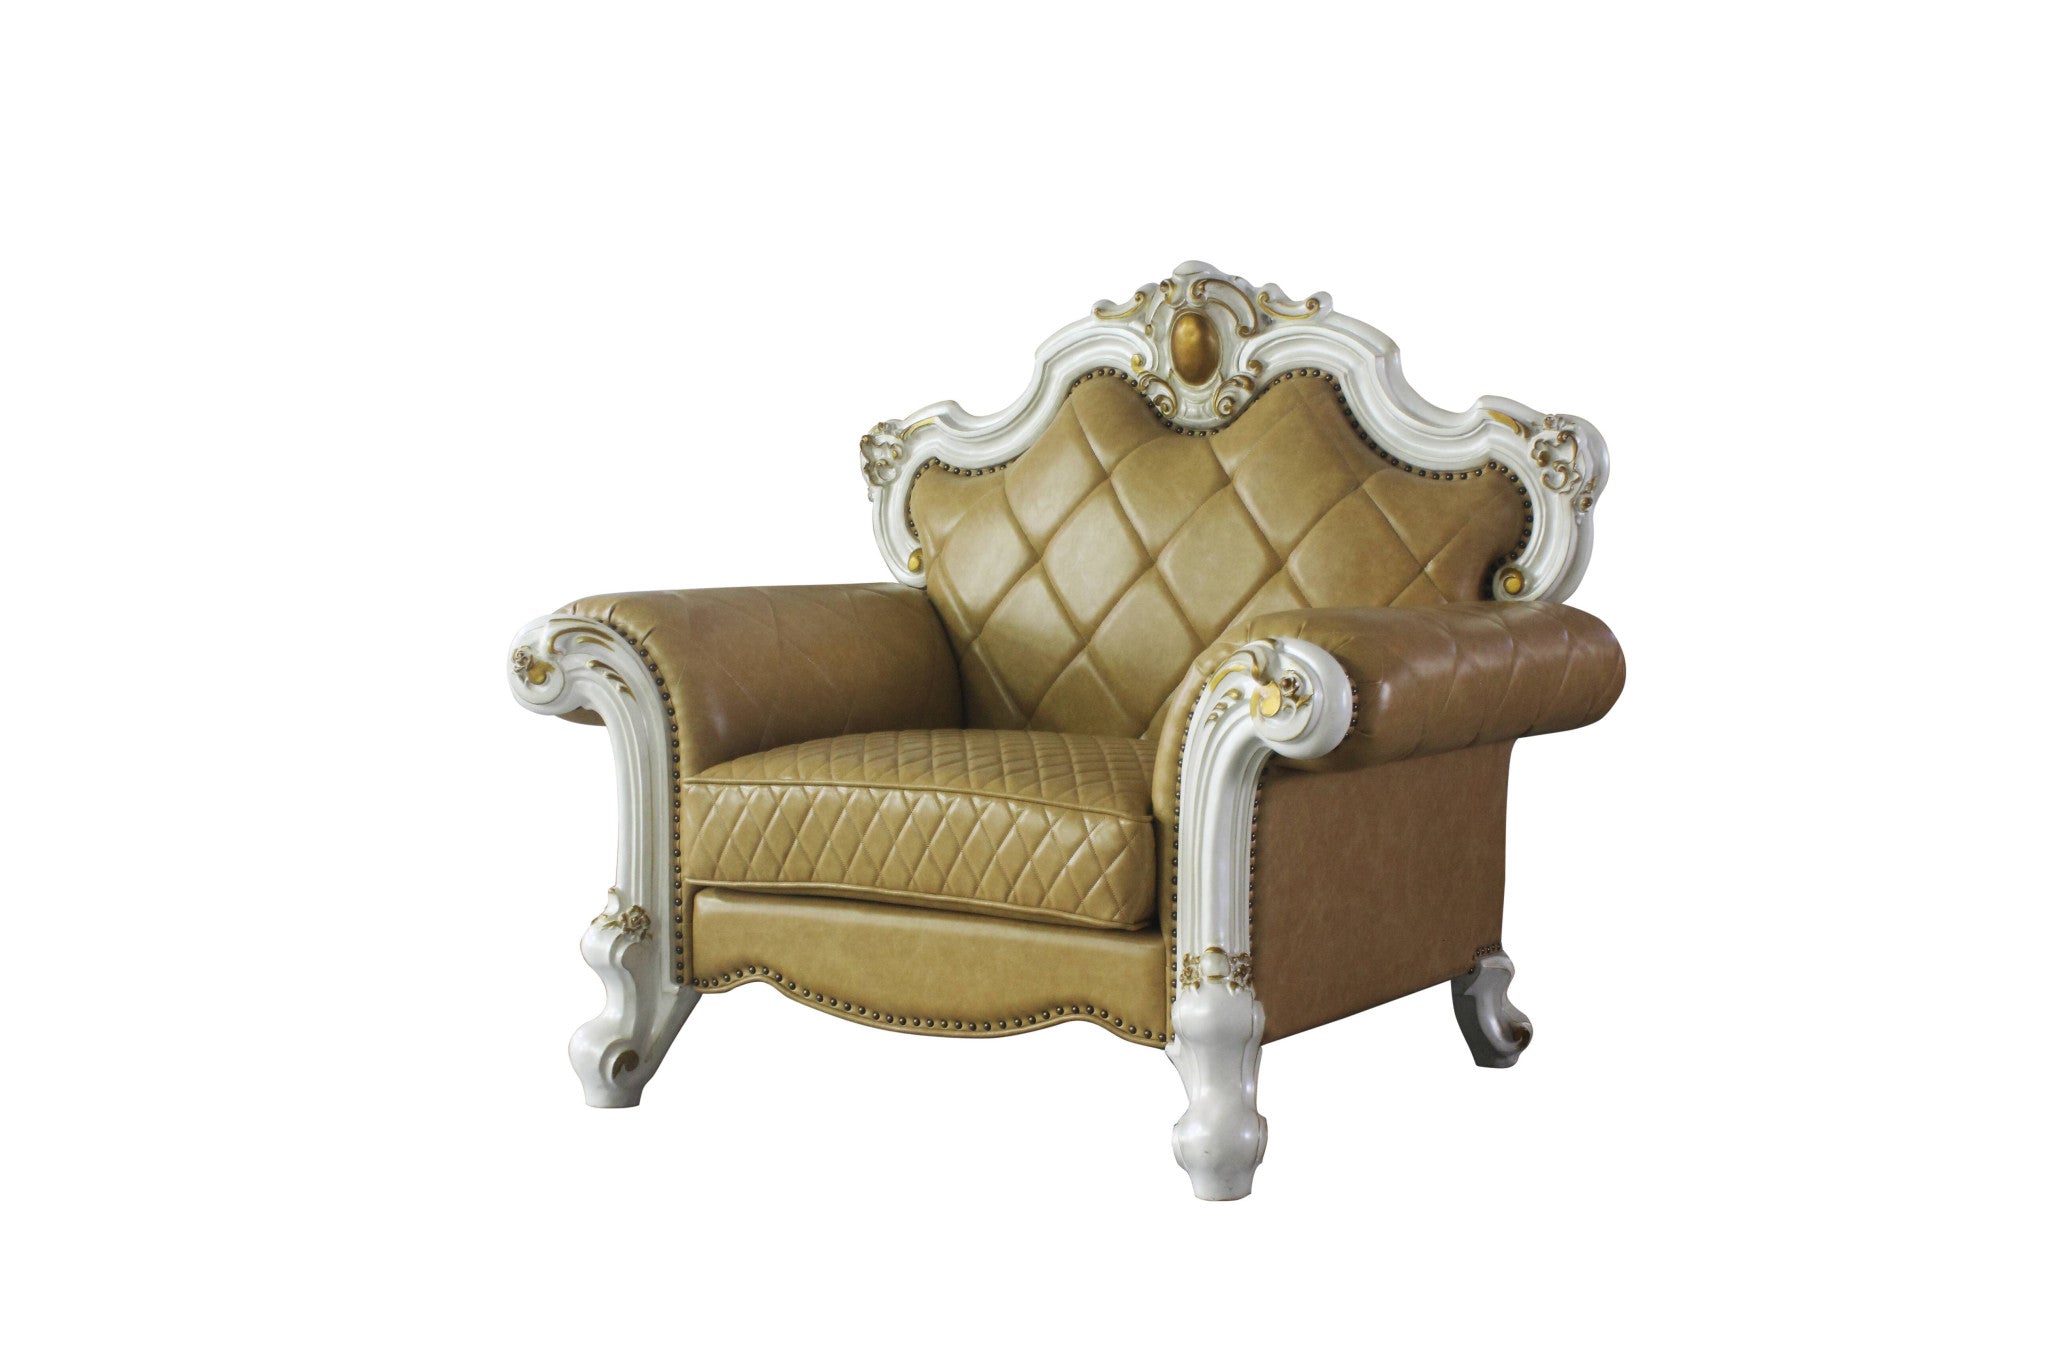 50" Beige and Pearl Faux Leather Tufted Arm Chair